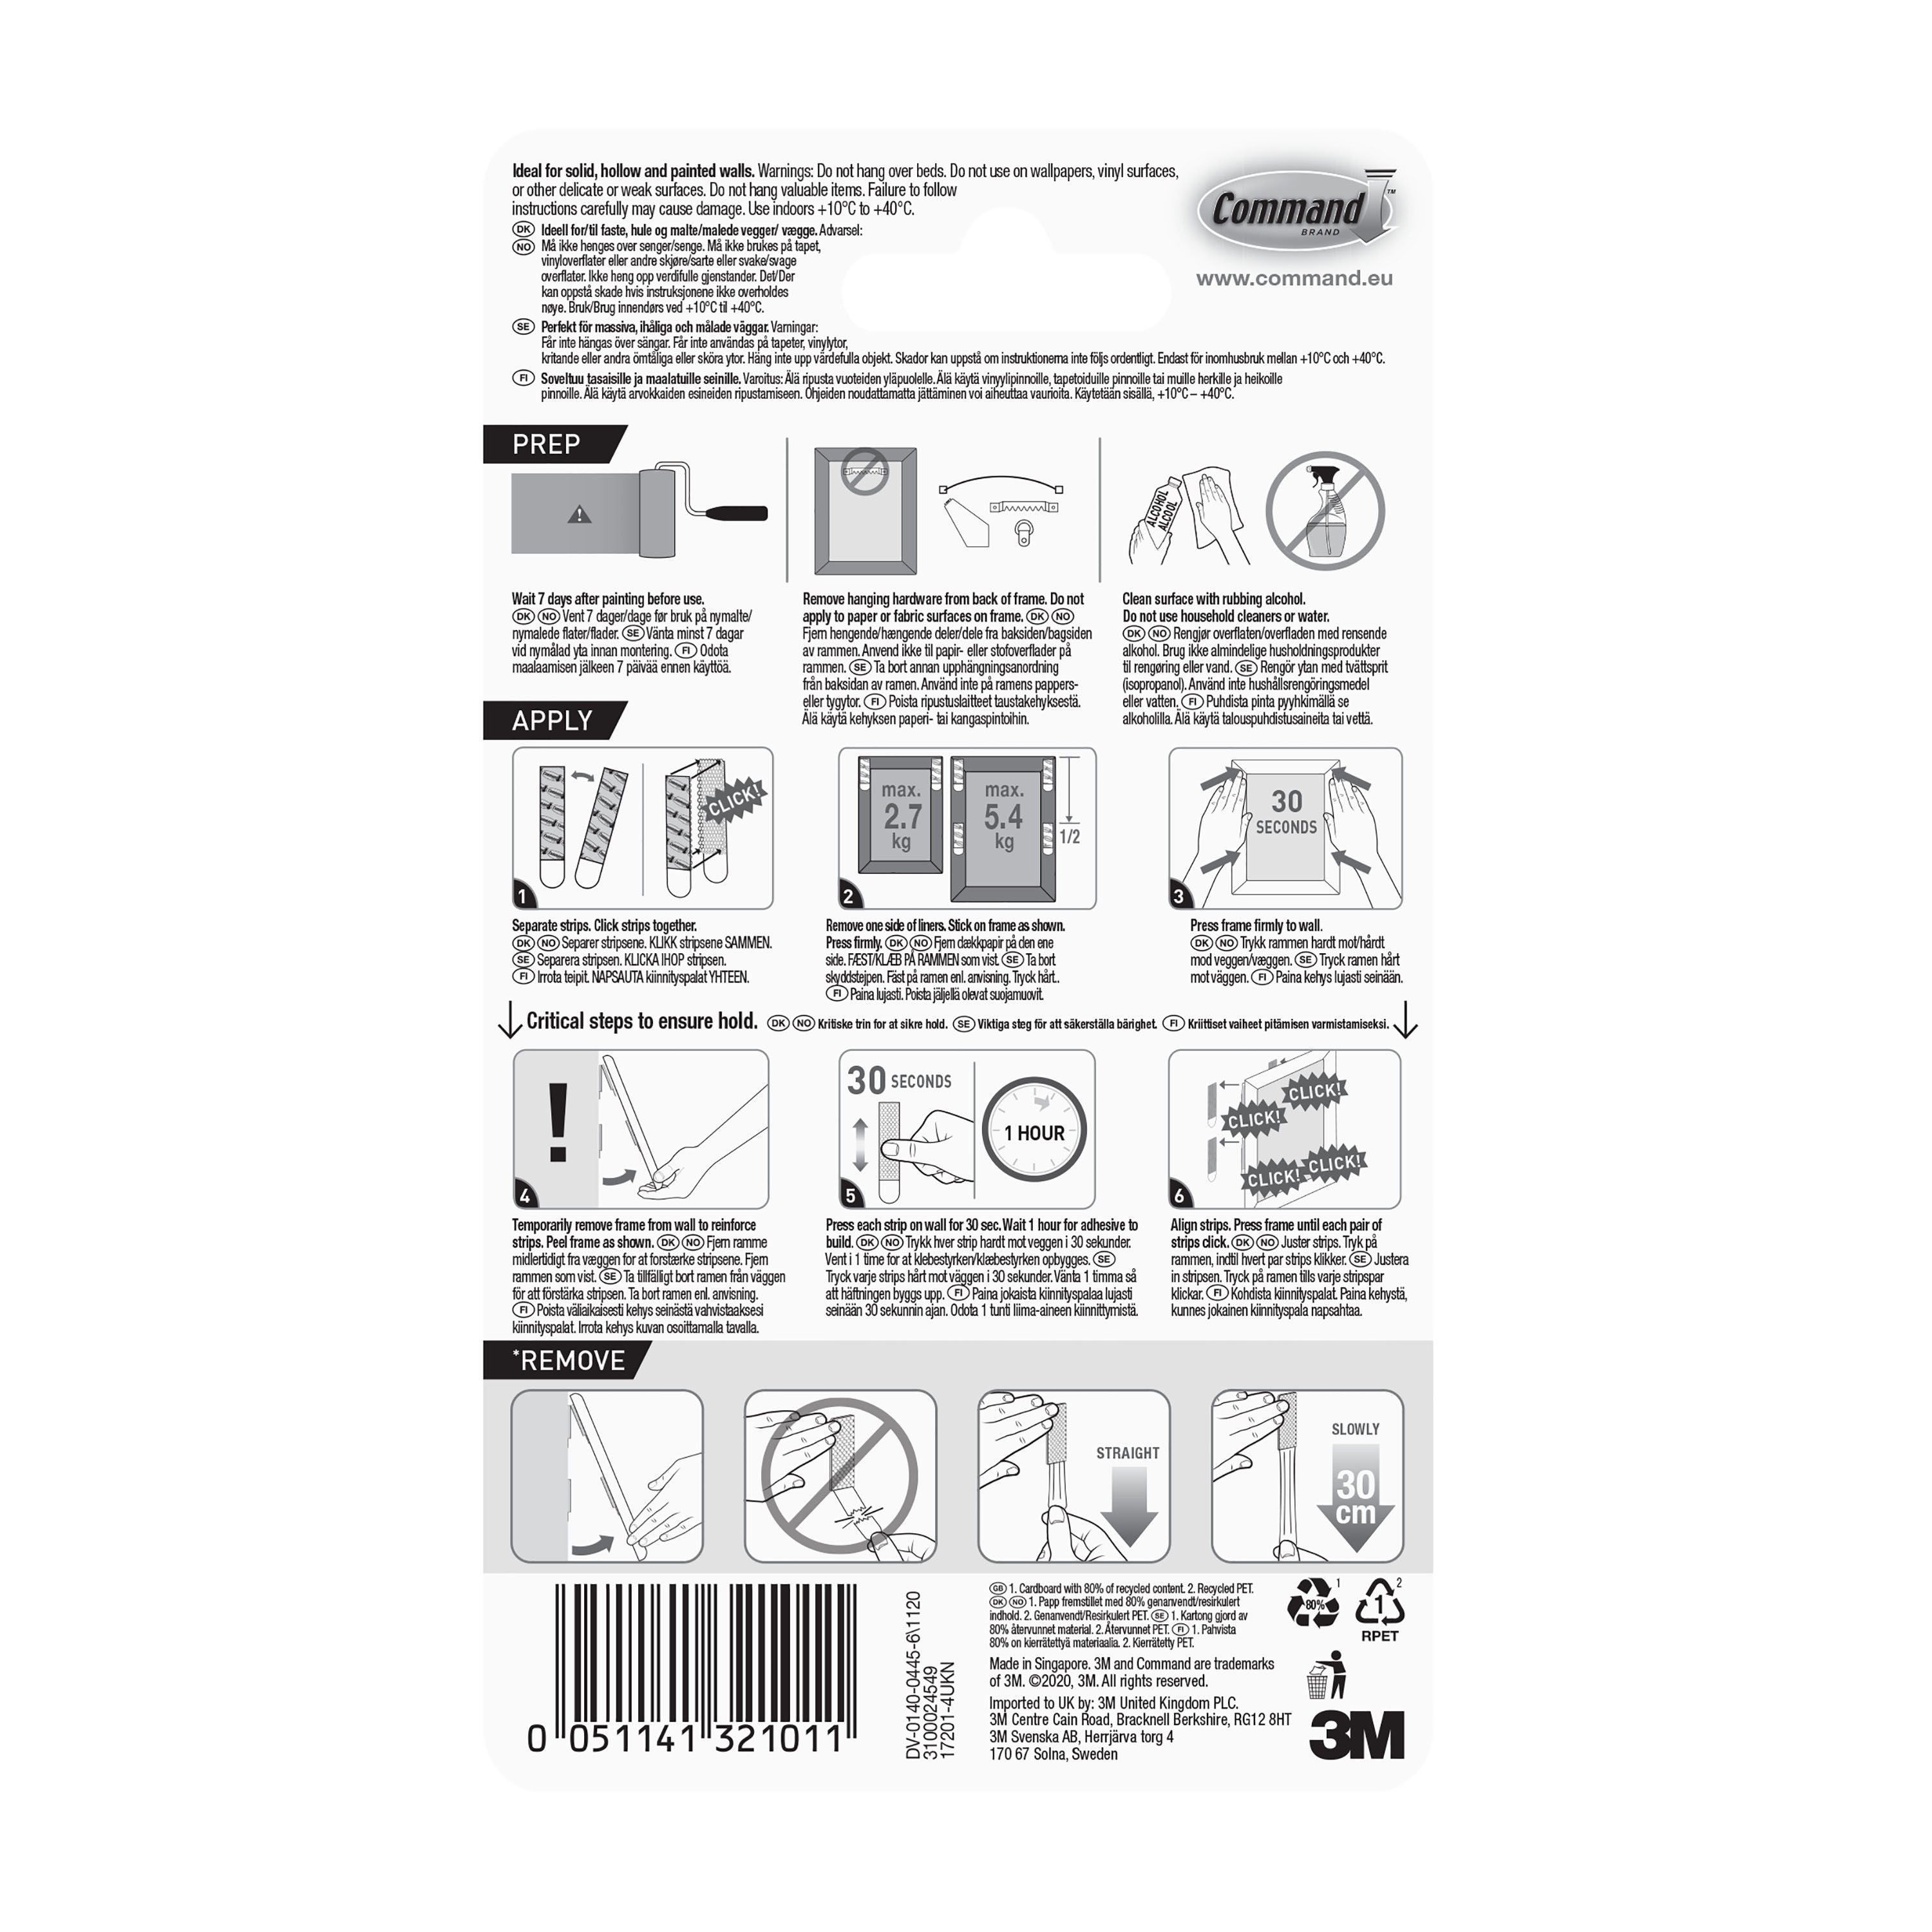 3M Command Medium White Picture hanging Adhesive strip (Holds)4kg